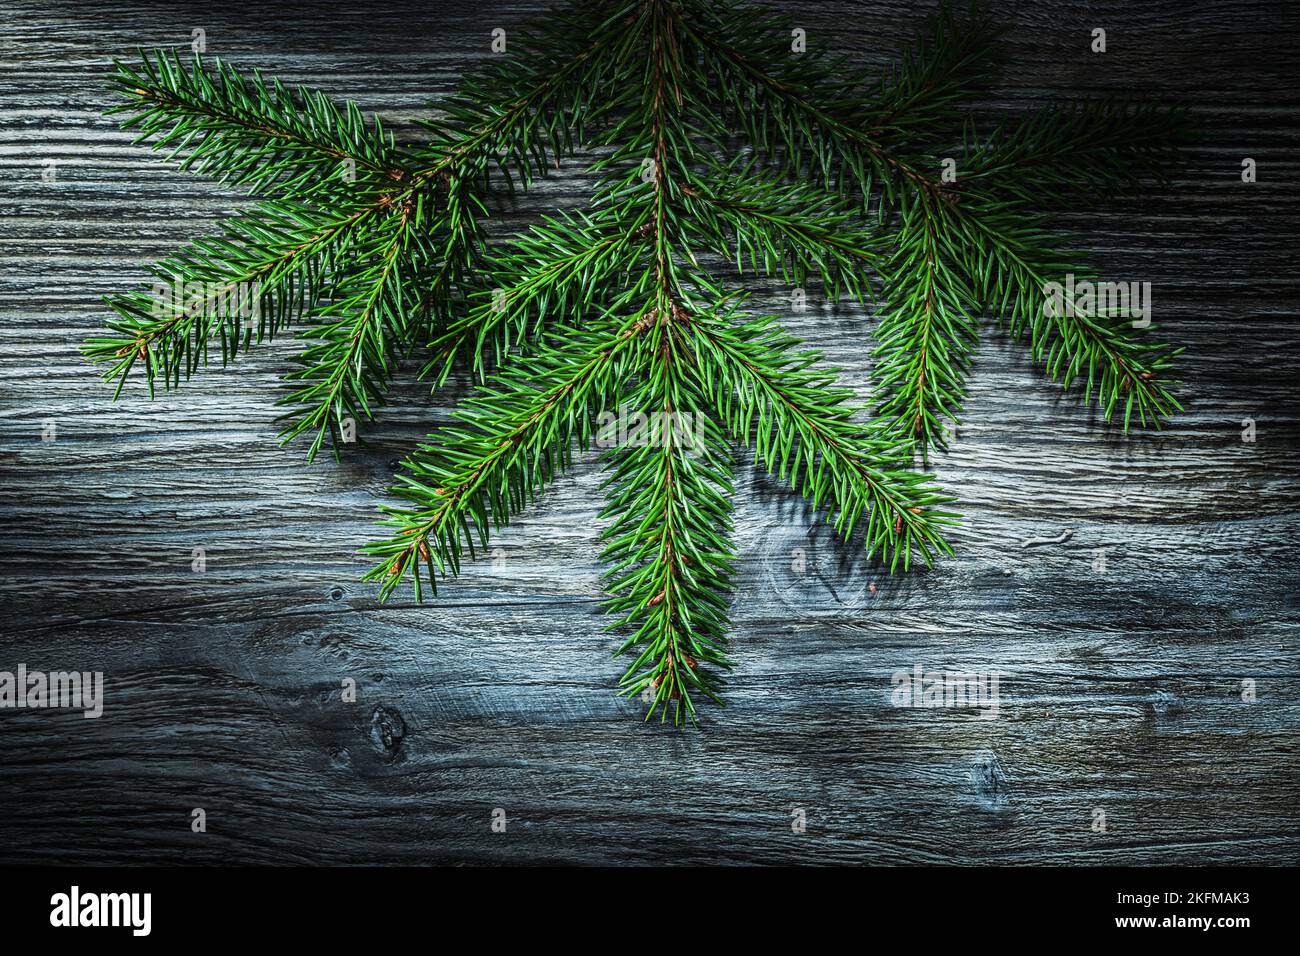 Pine tree branch on wooden board. Stock Photo